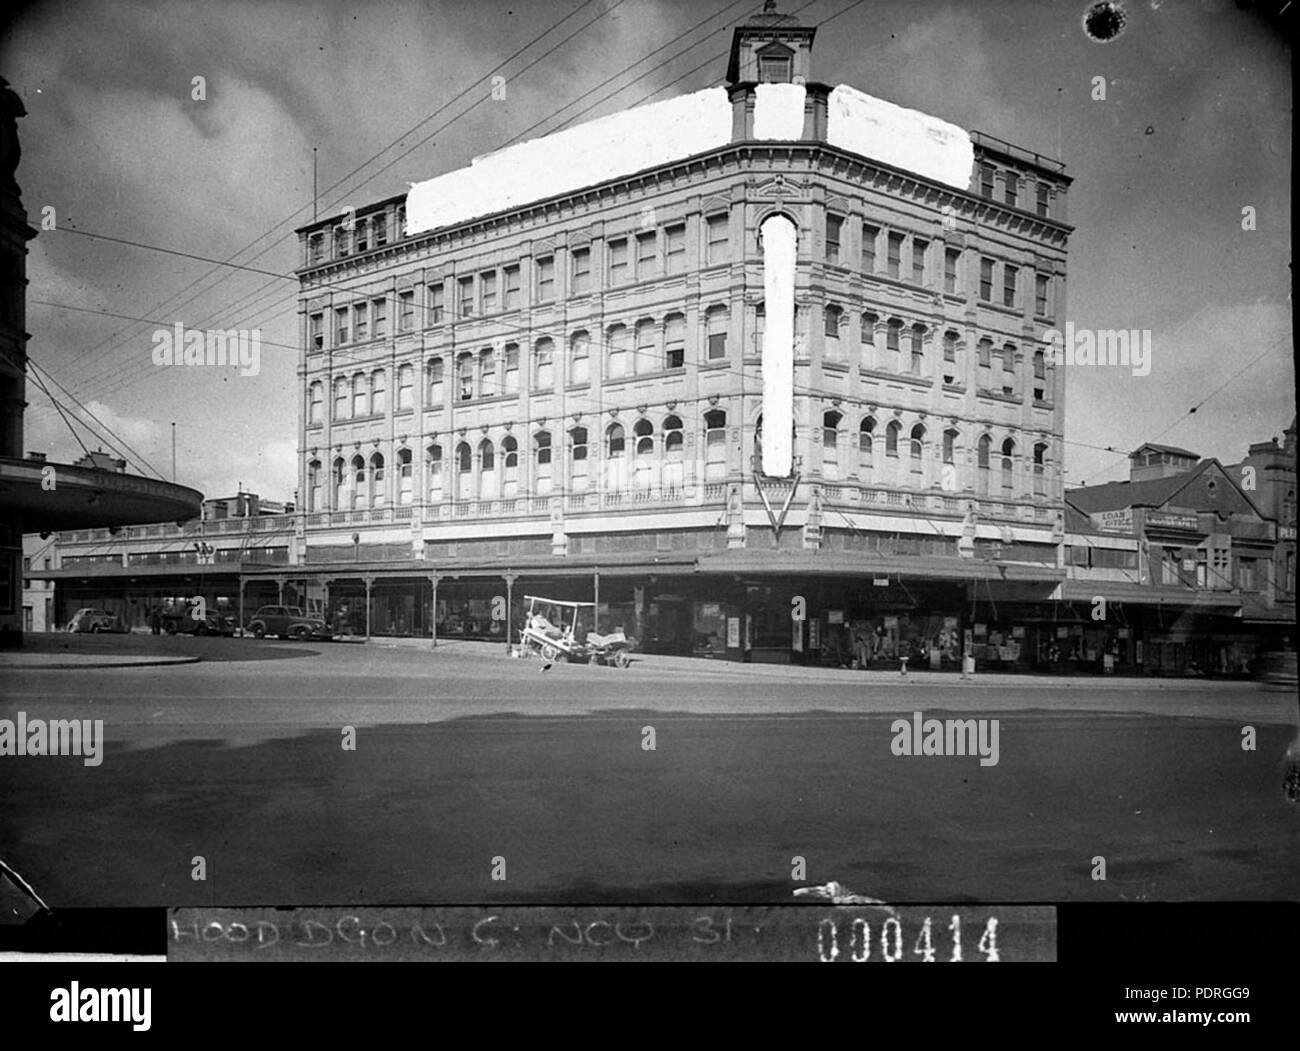 134 SLNSW 13002 Buckinghams Department Store Oxford Street Darlinghurst with V for Victory sign taken for Building Publishing Co Stock Photo